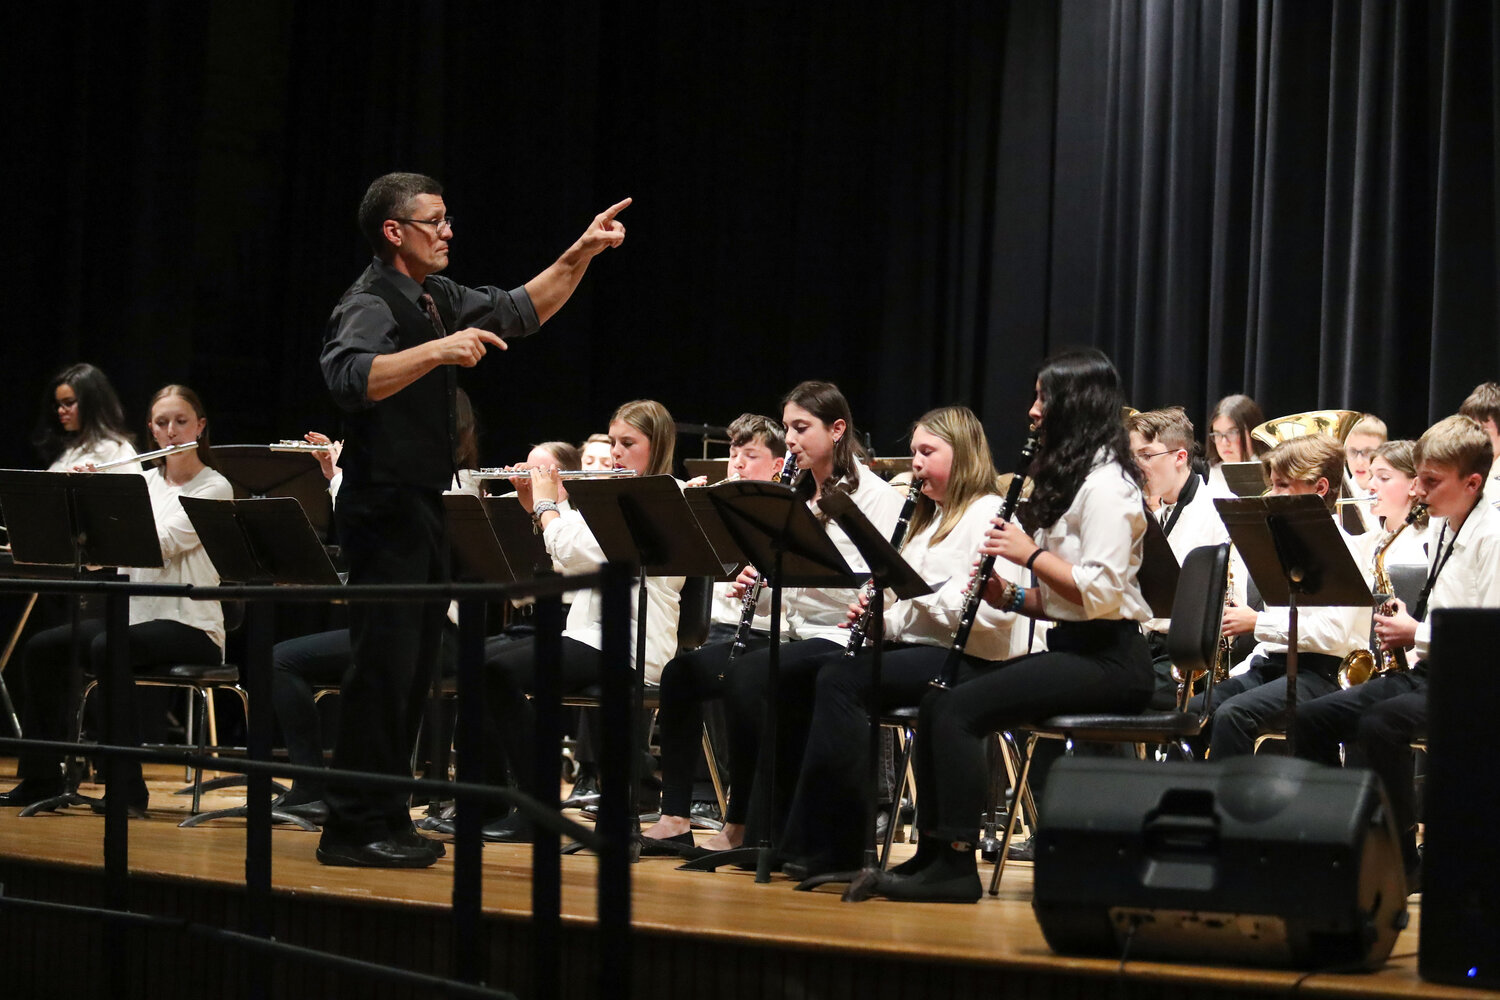 Michael Alves directs the concert band during Tiverton Middle School’s spring concert at the high school